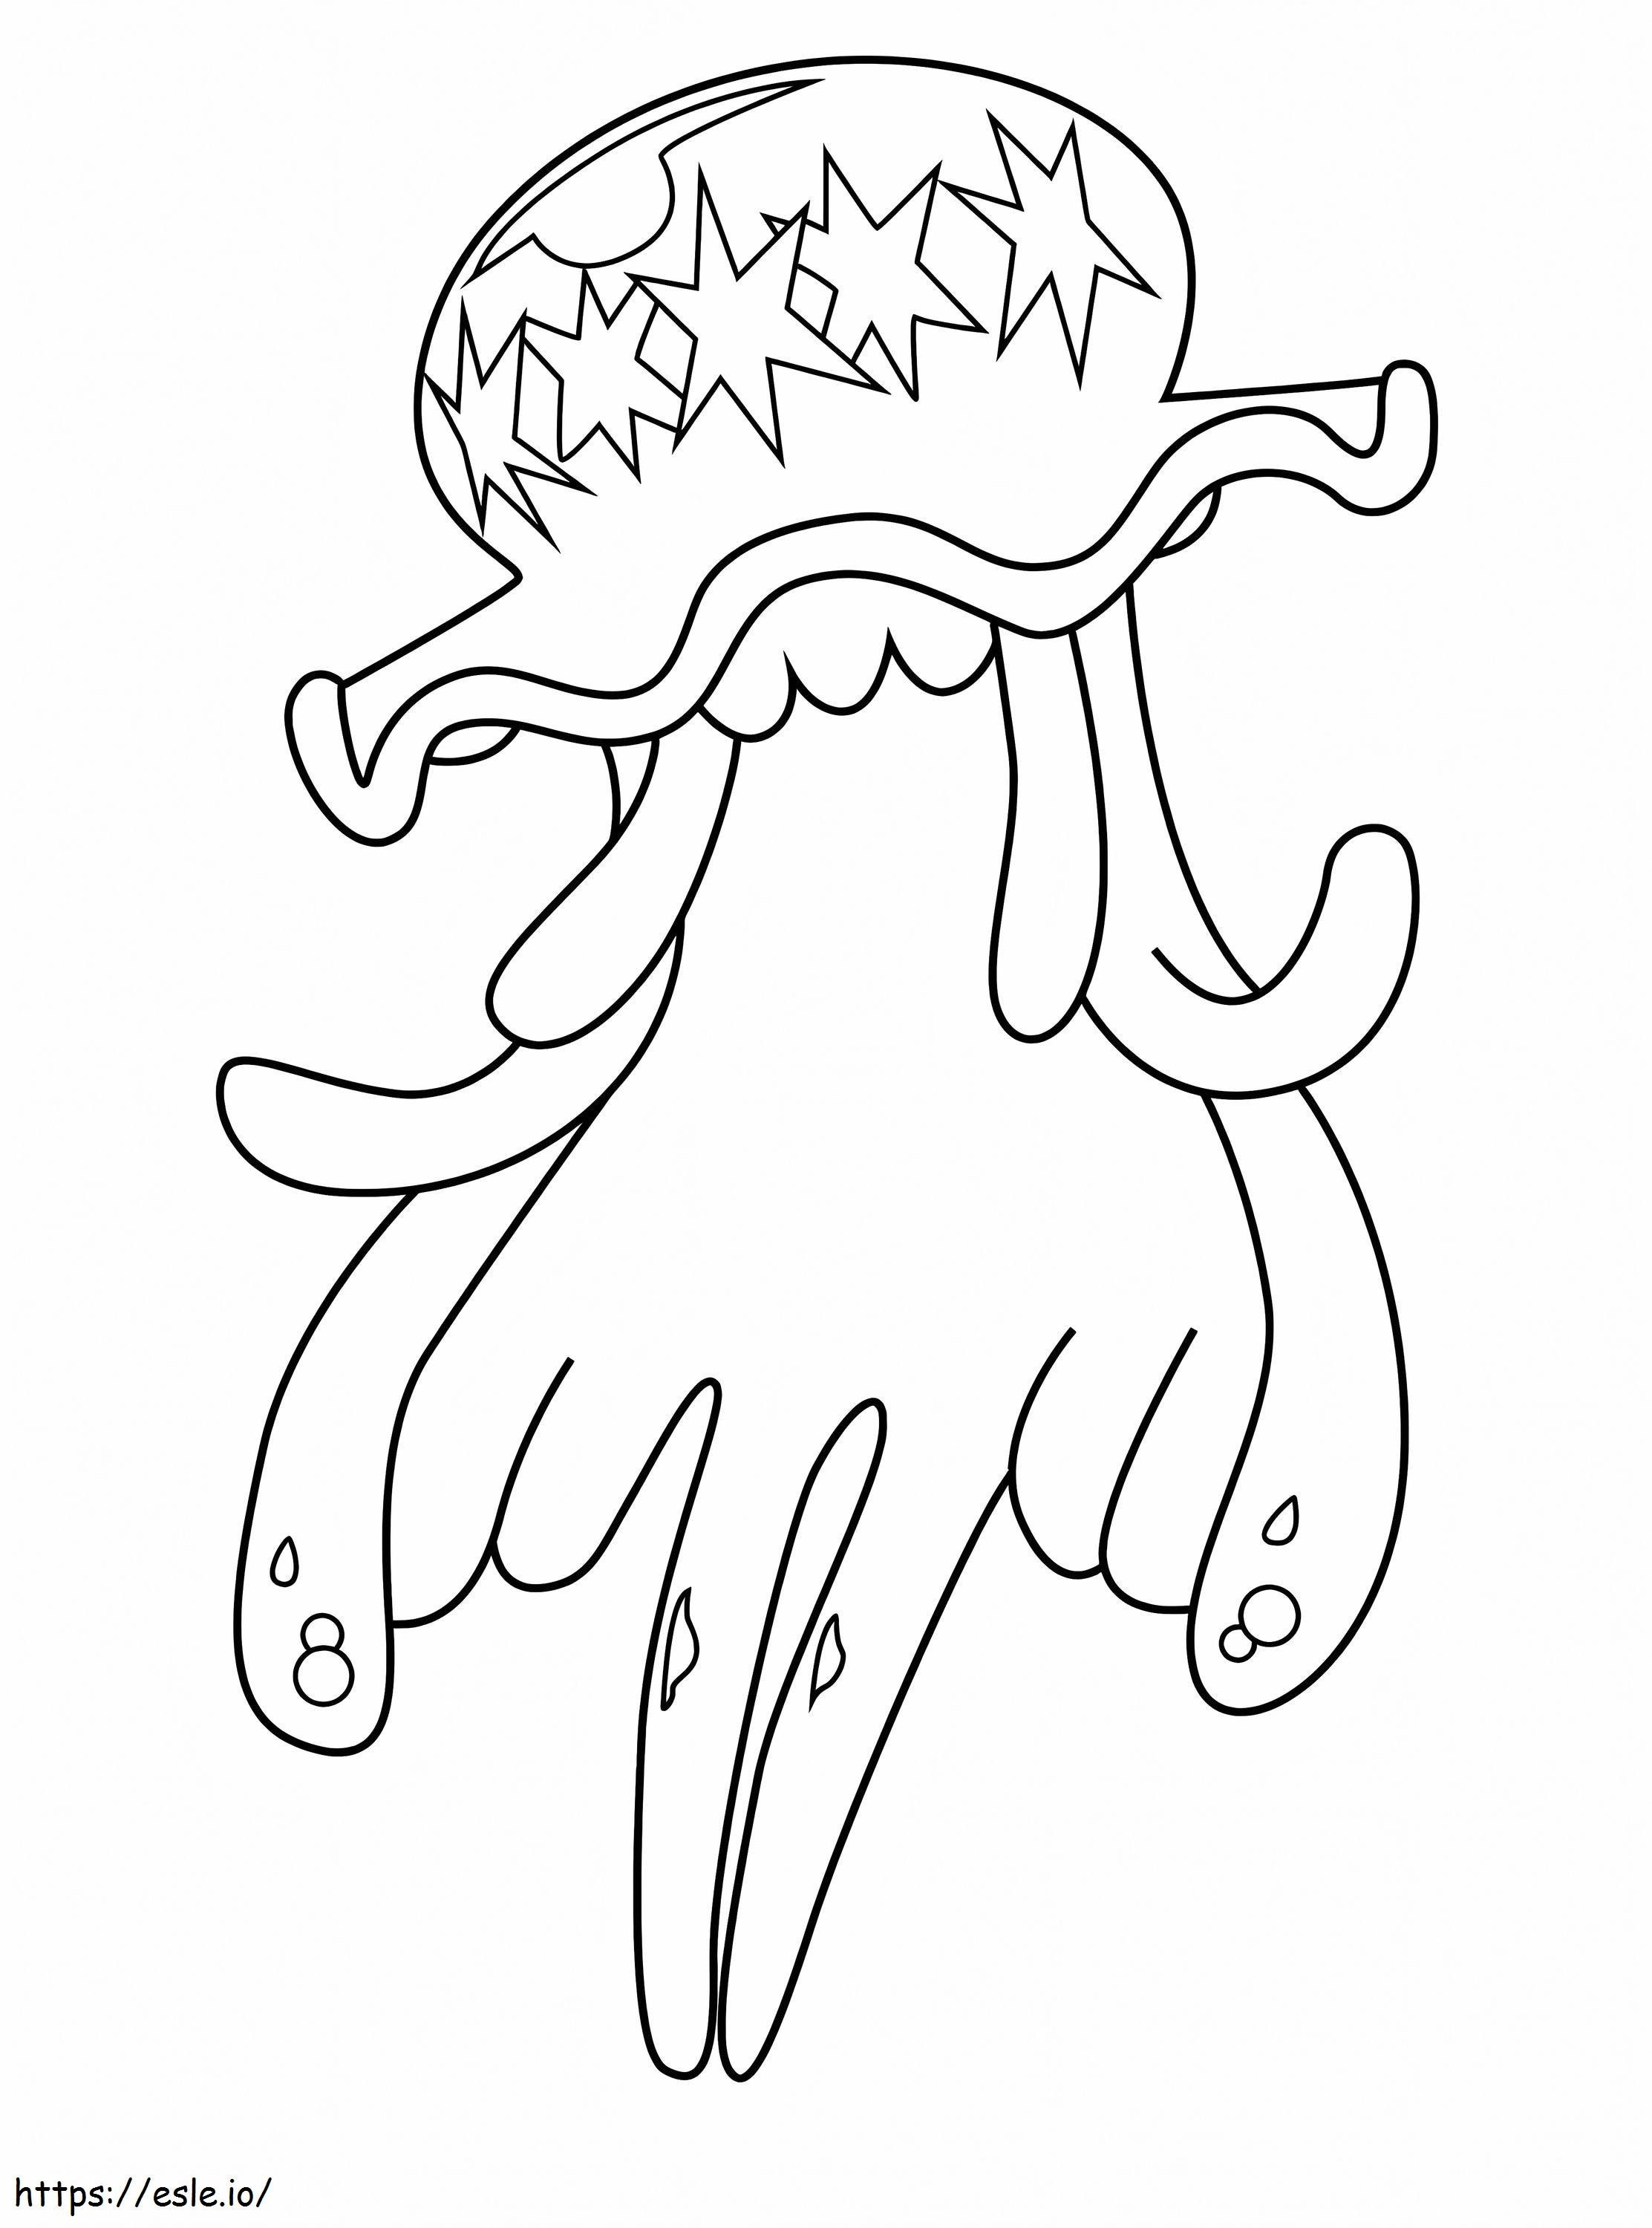 Nihilego In Legendary Pokemon coloring page